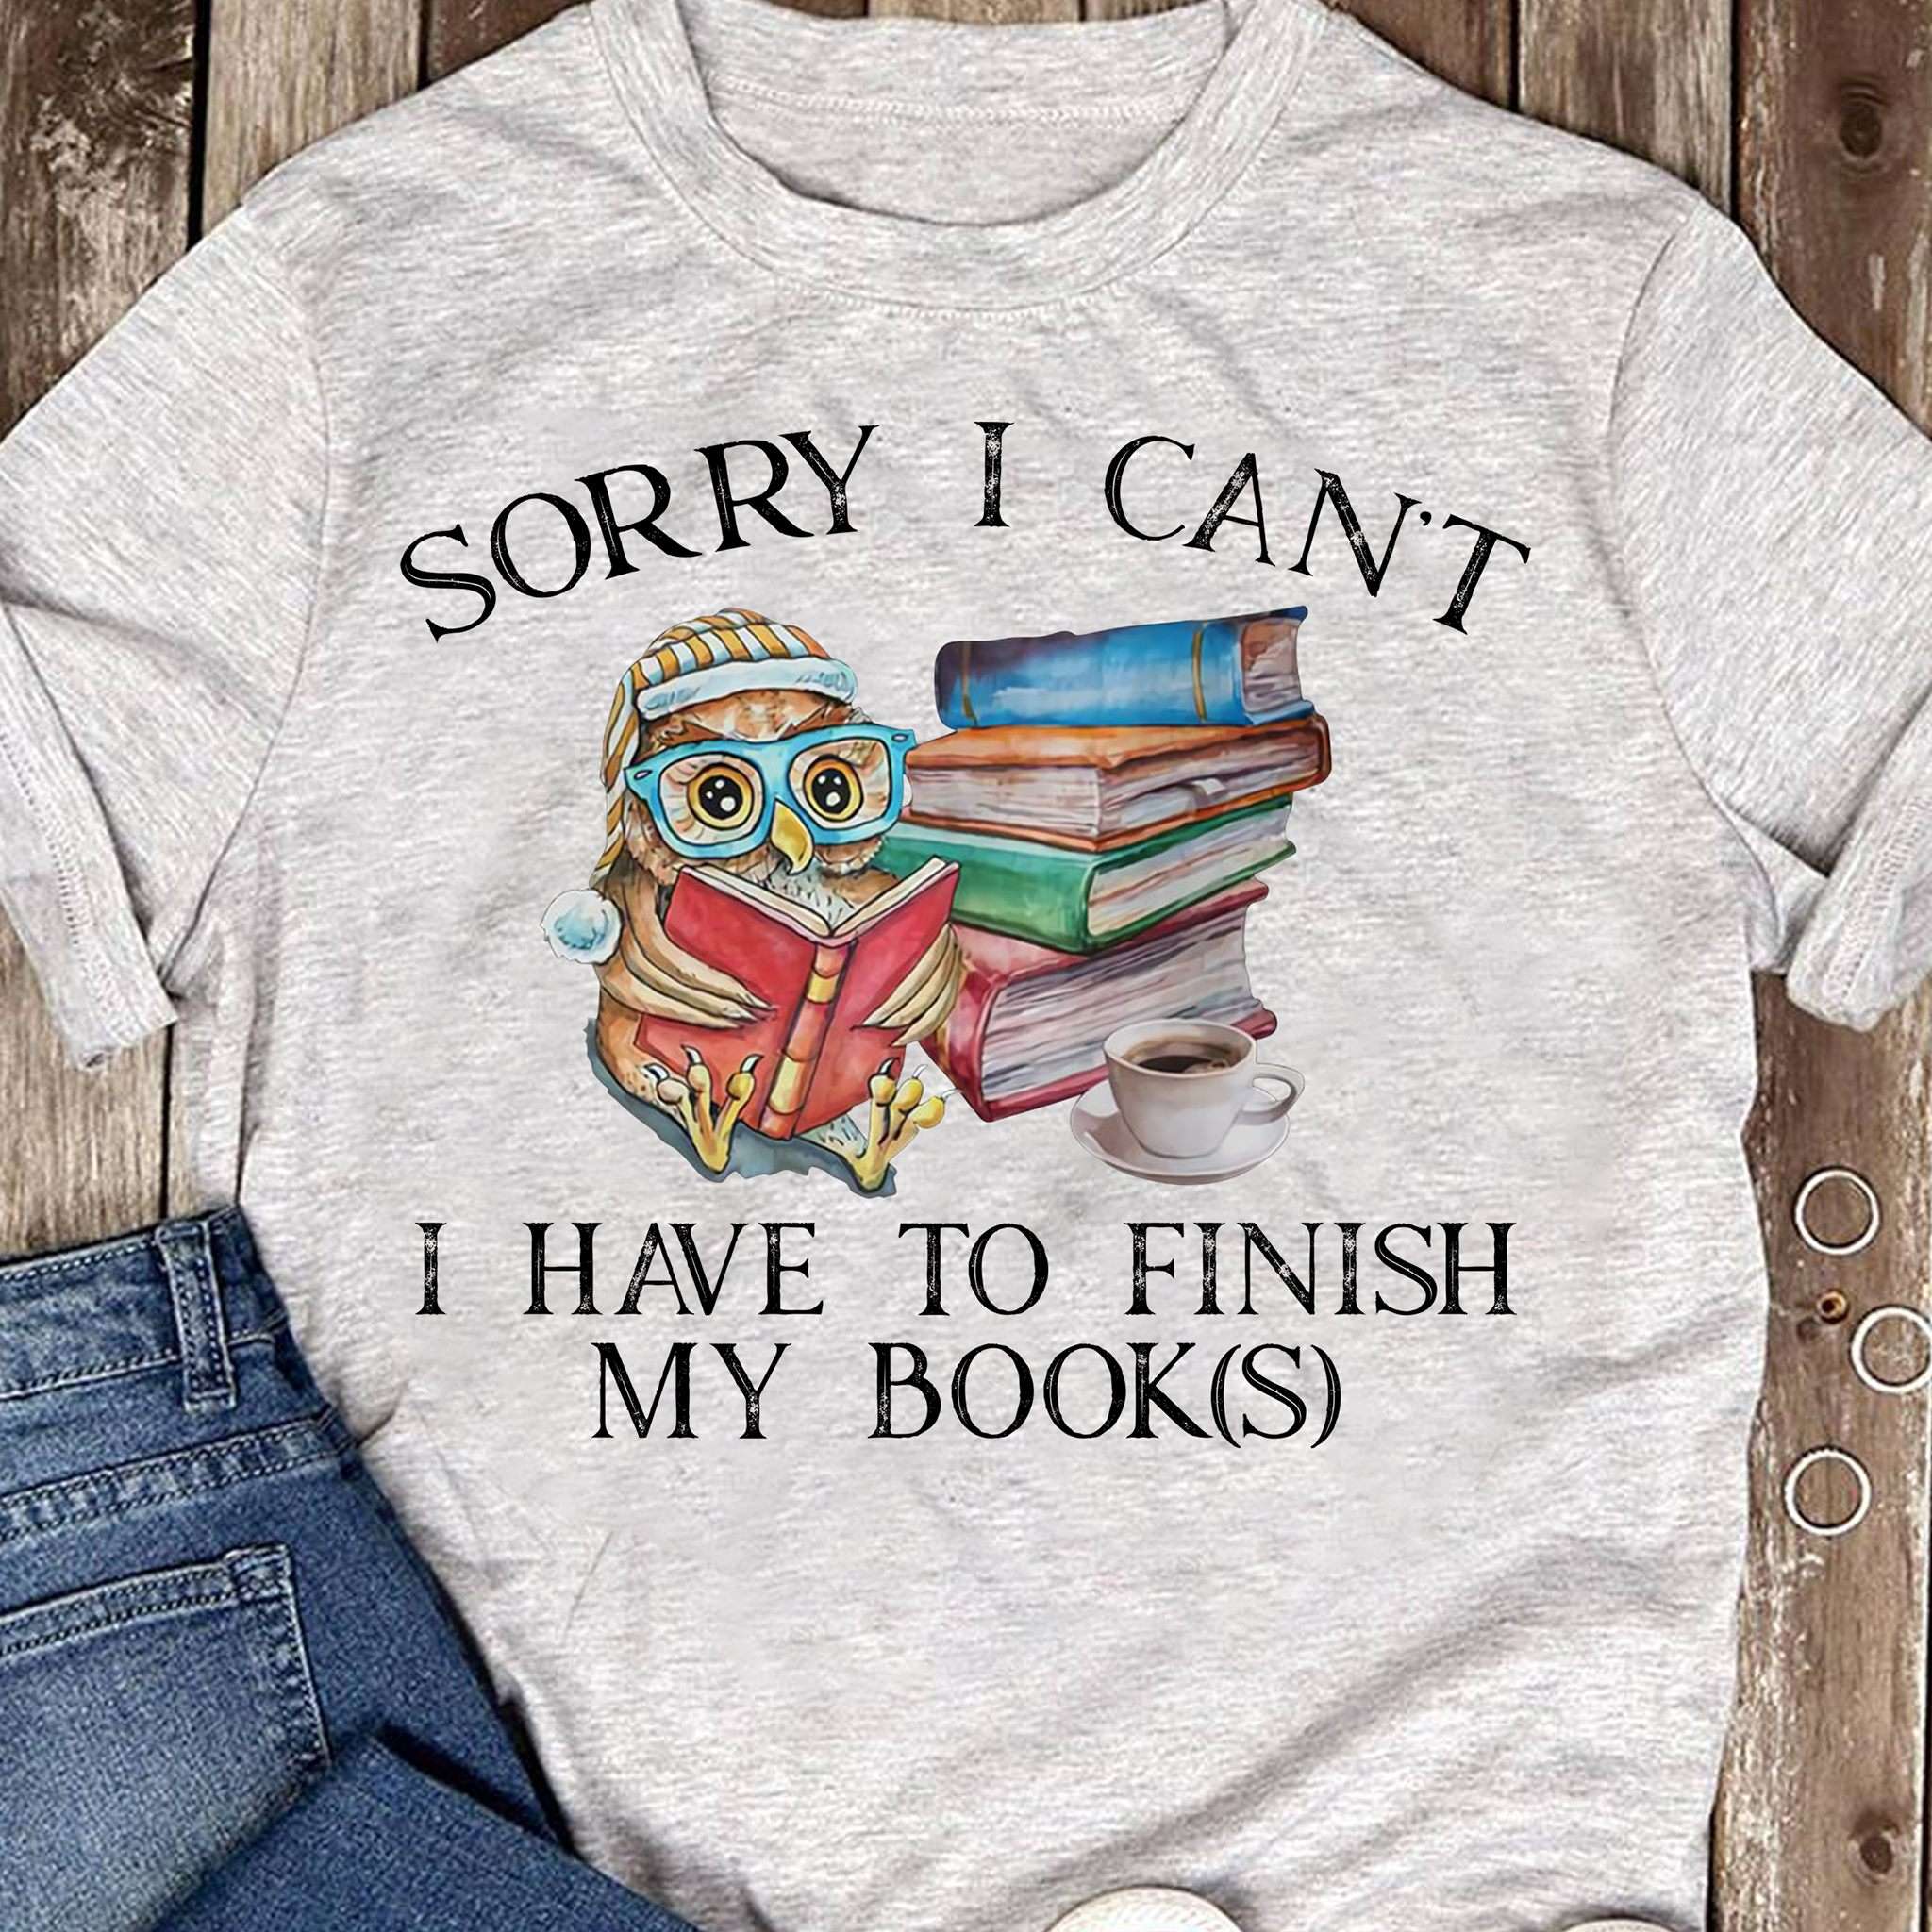 Sorry I can't I have to finish my books - Owl reading books, bookaholic T-shirt